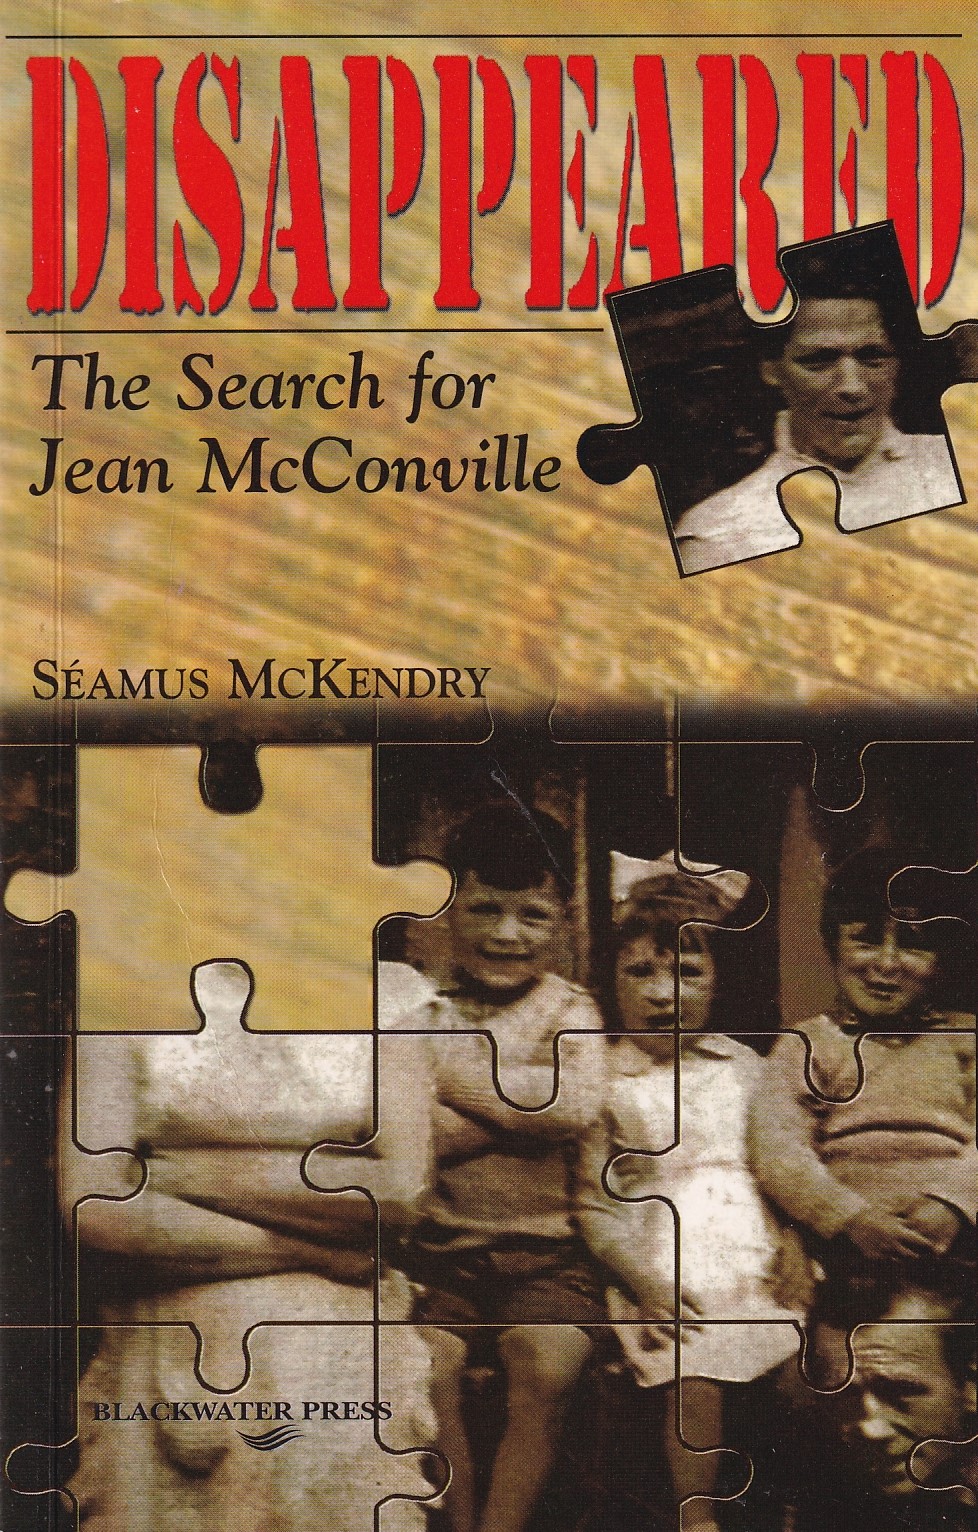 Disappeared : The Search for Jean McConville by Seamus McKendry